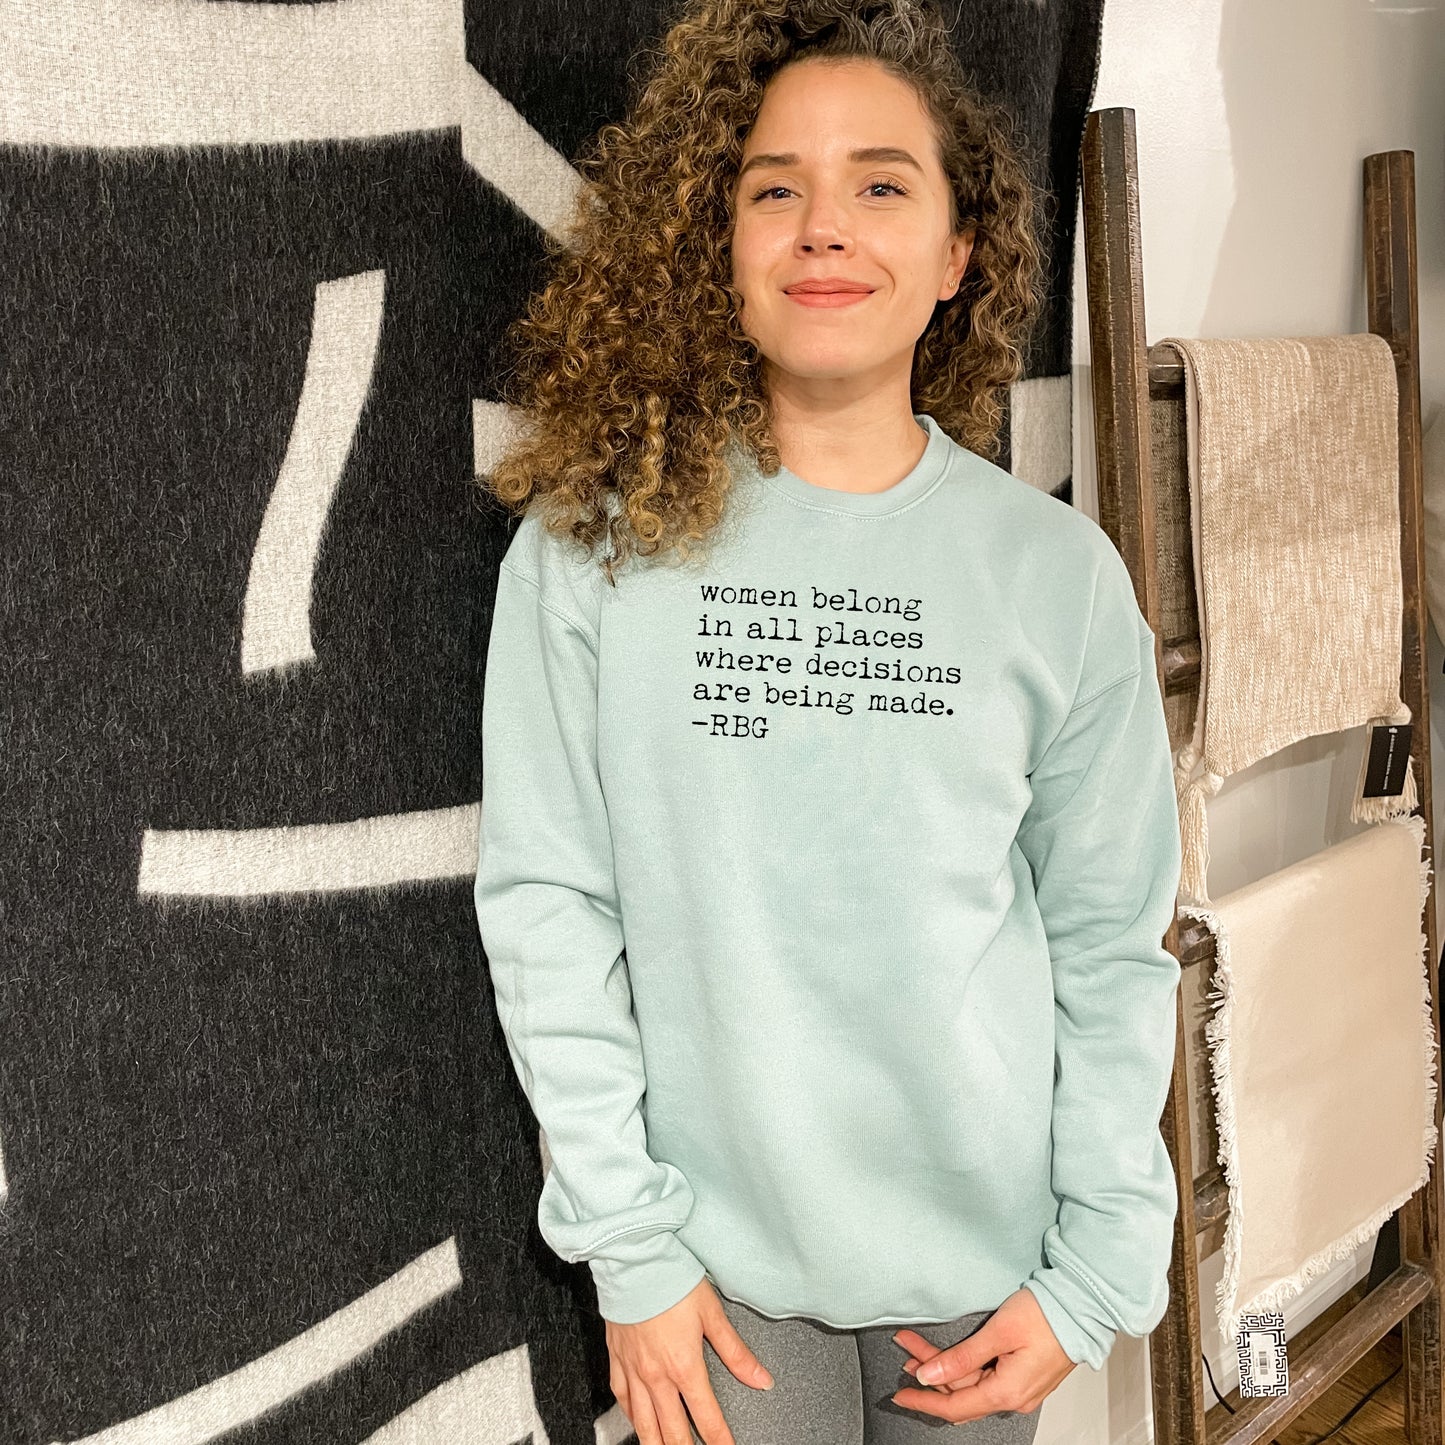 Women Belong In All Places Where Decisions Are Being Made - RBG - Unisex Sweatshirt - Heather Gray or Dusty Blue